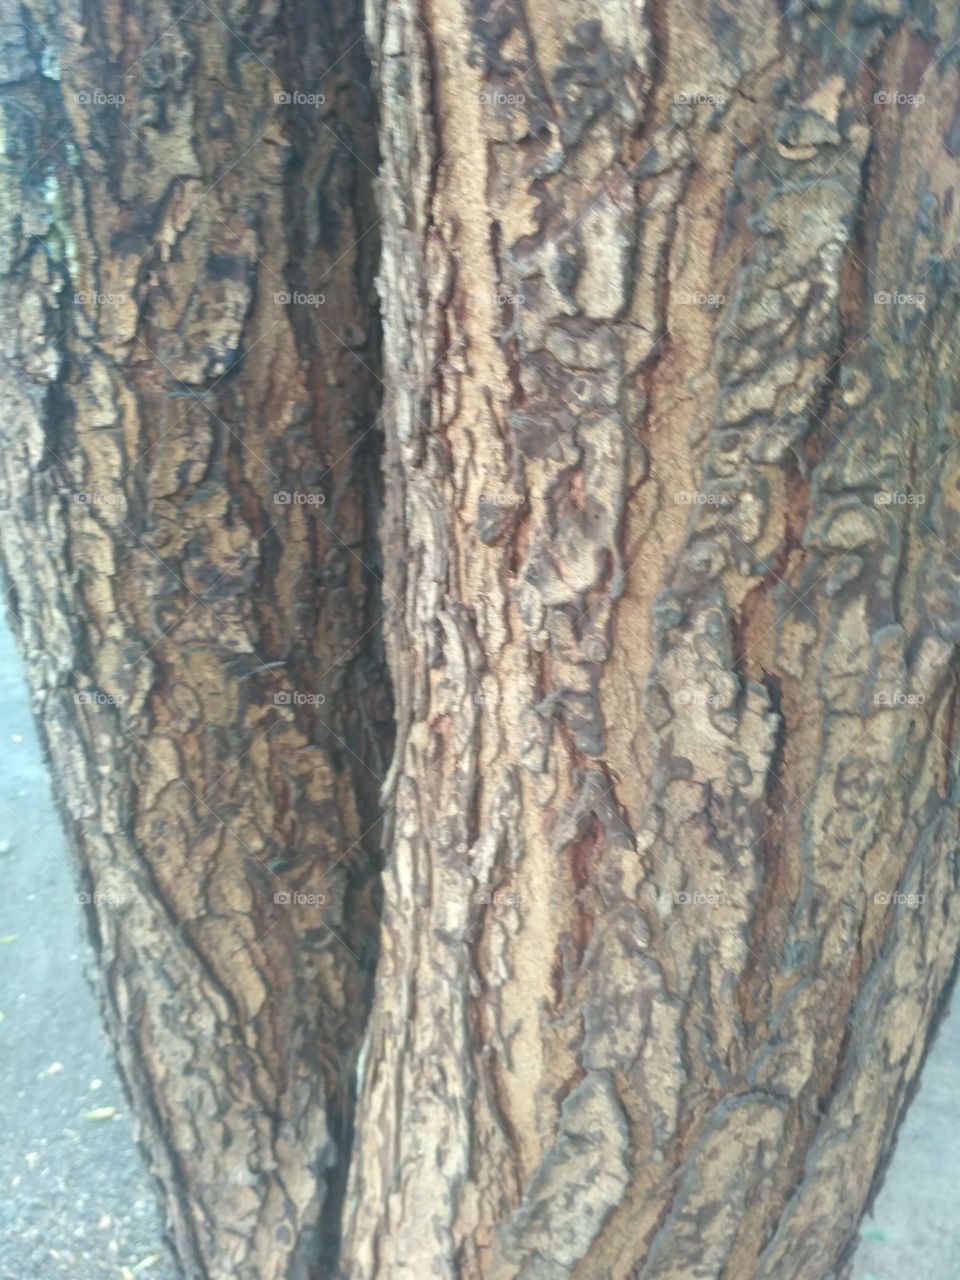 awesome wood of tree and look like to awesome pattern of tree